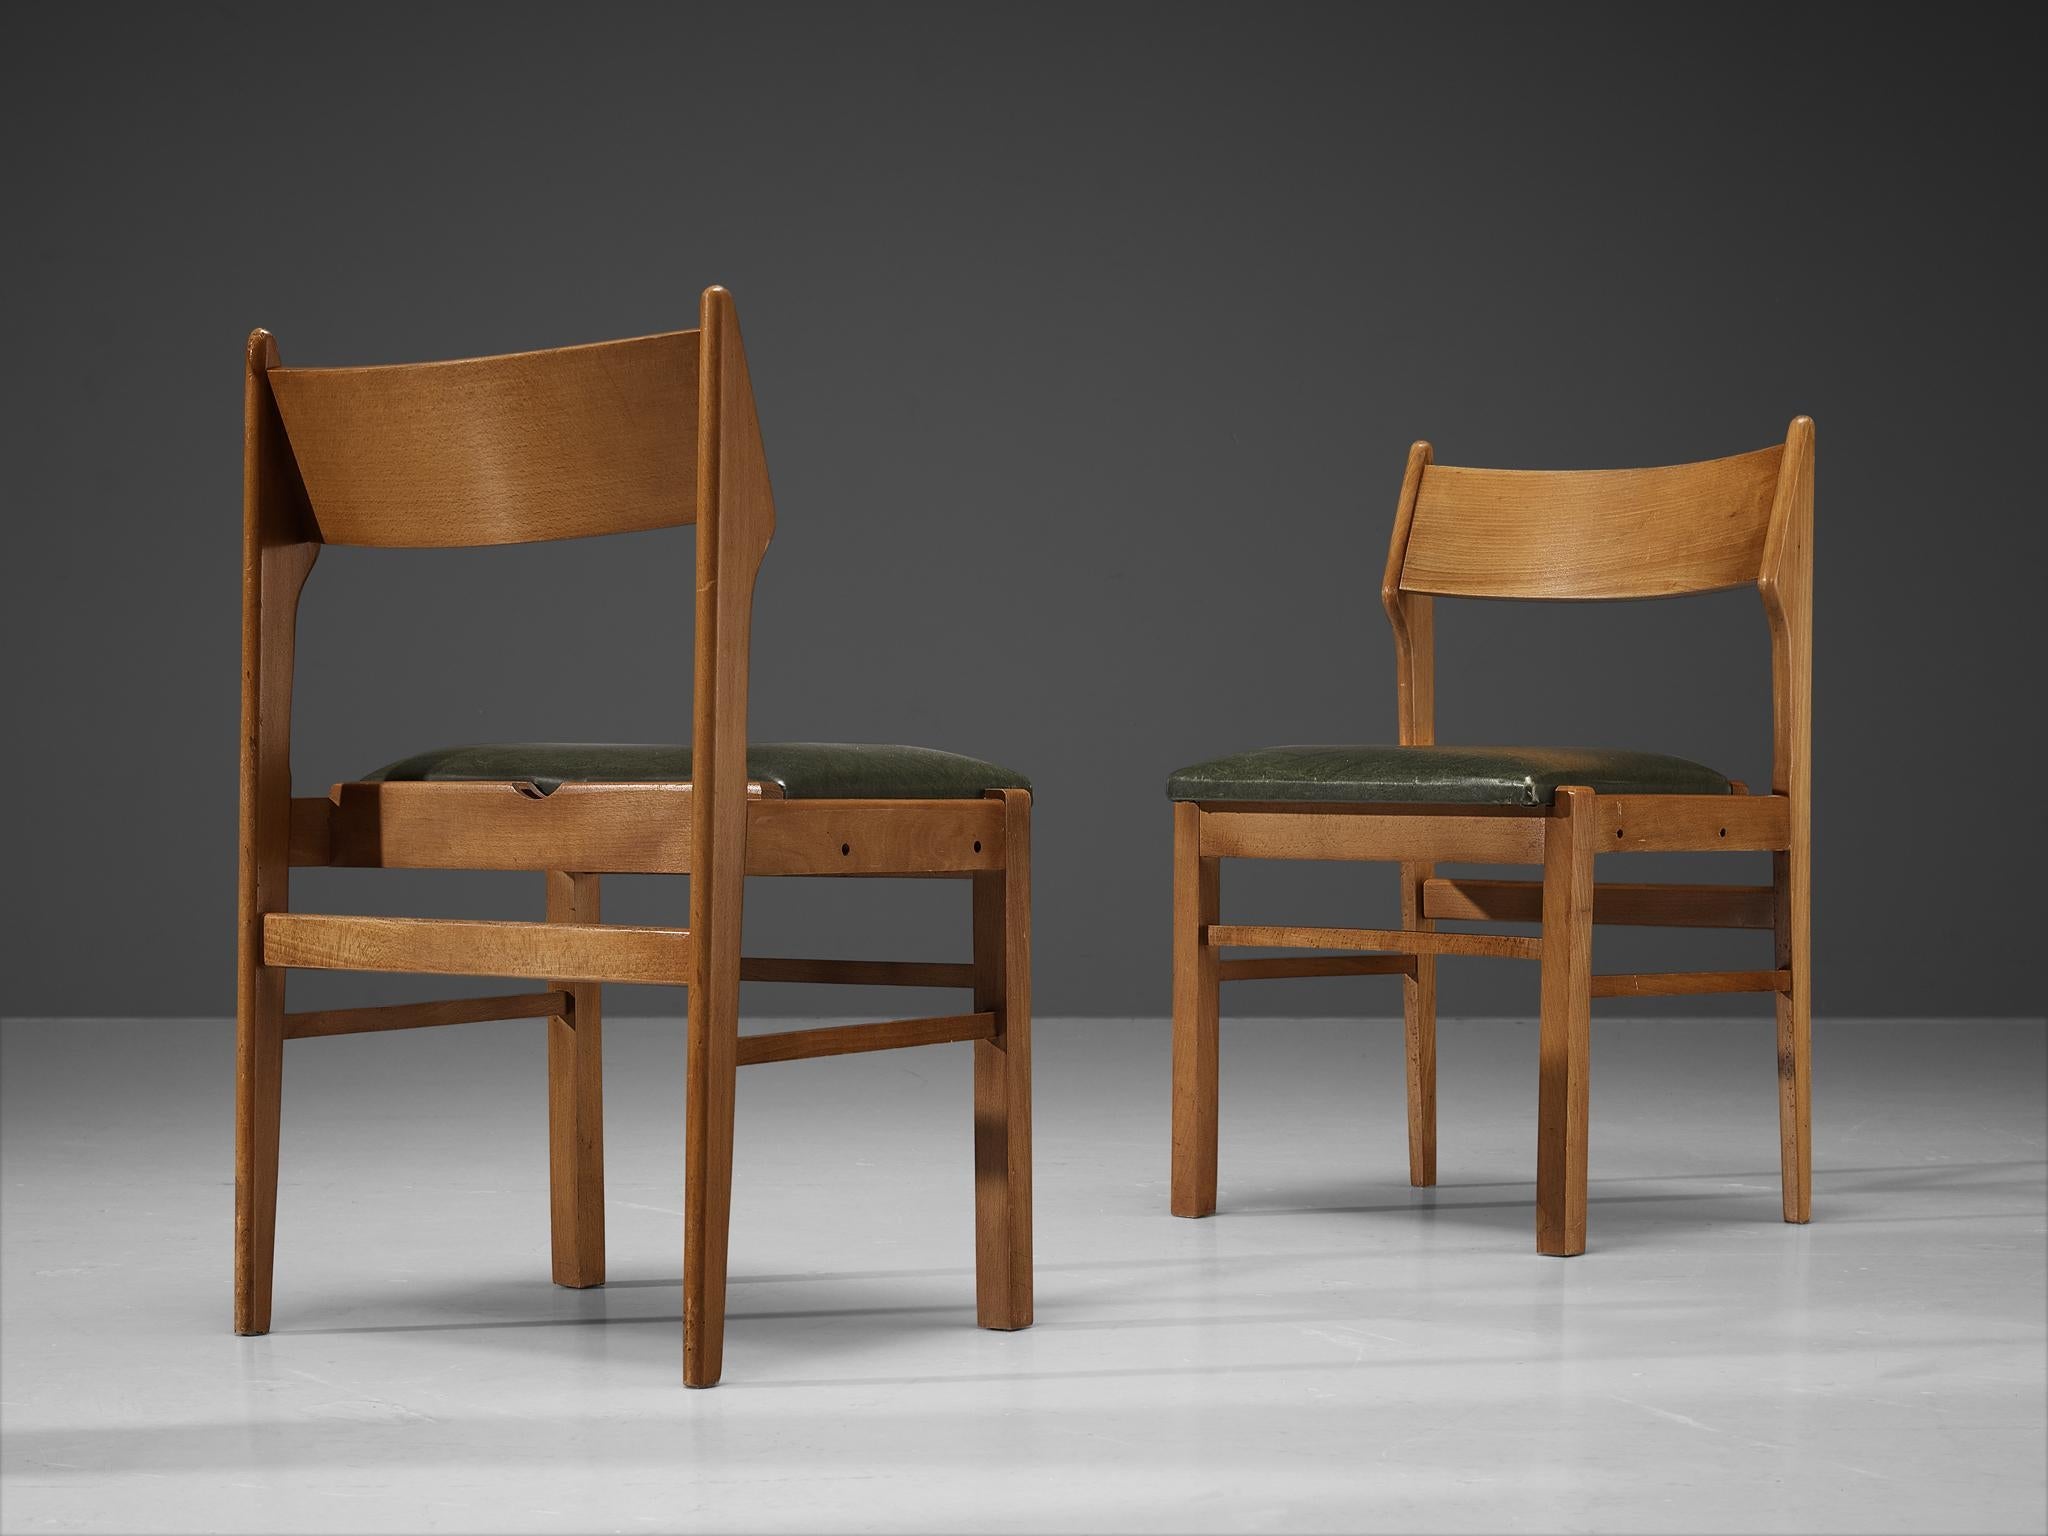 Dutch Set of Six Dining Chairs in Wood and Green Leatherette